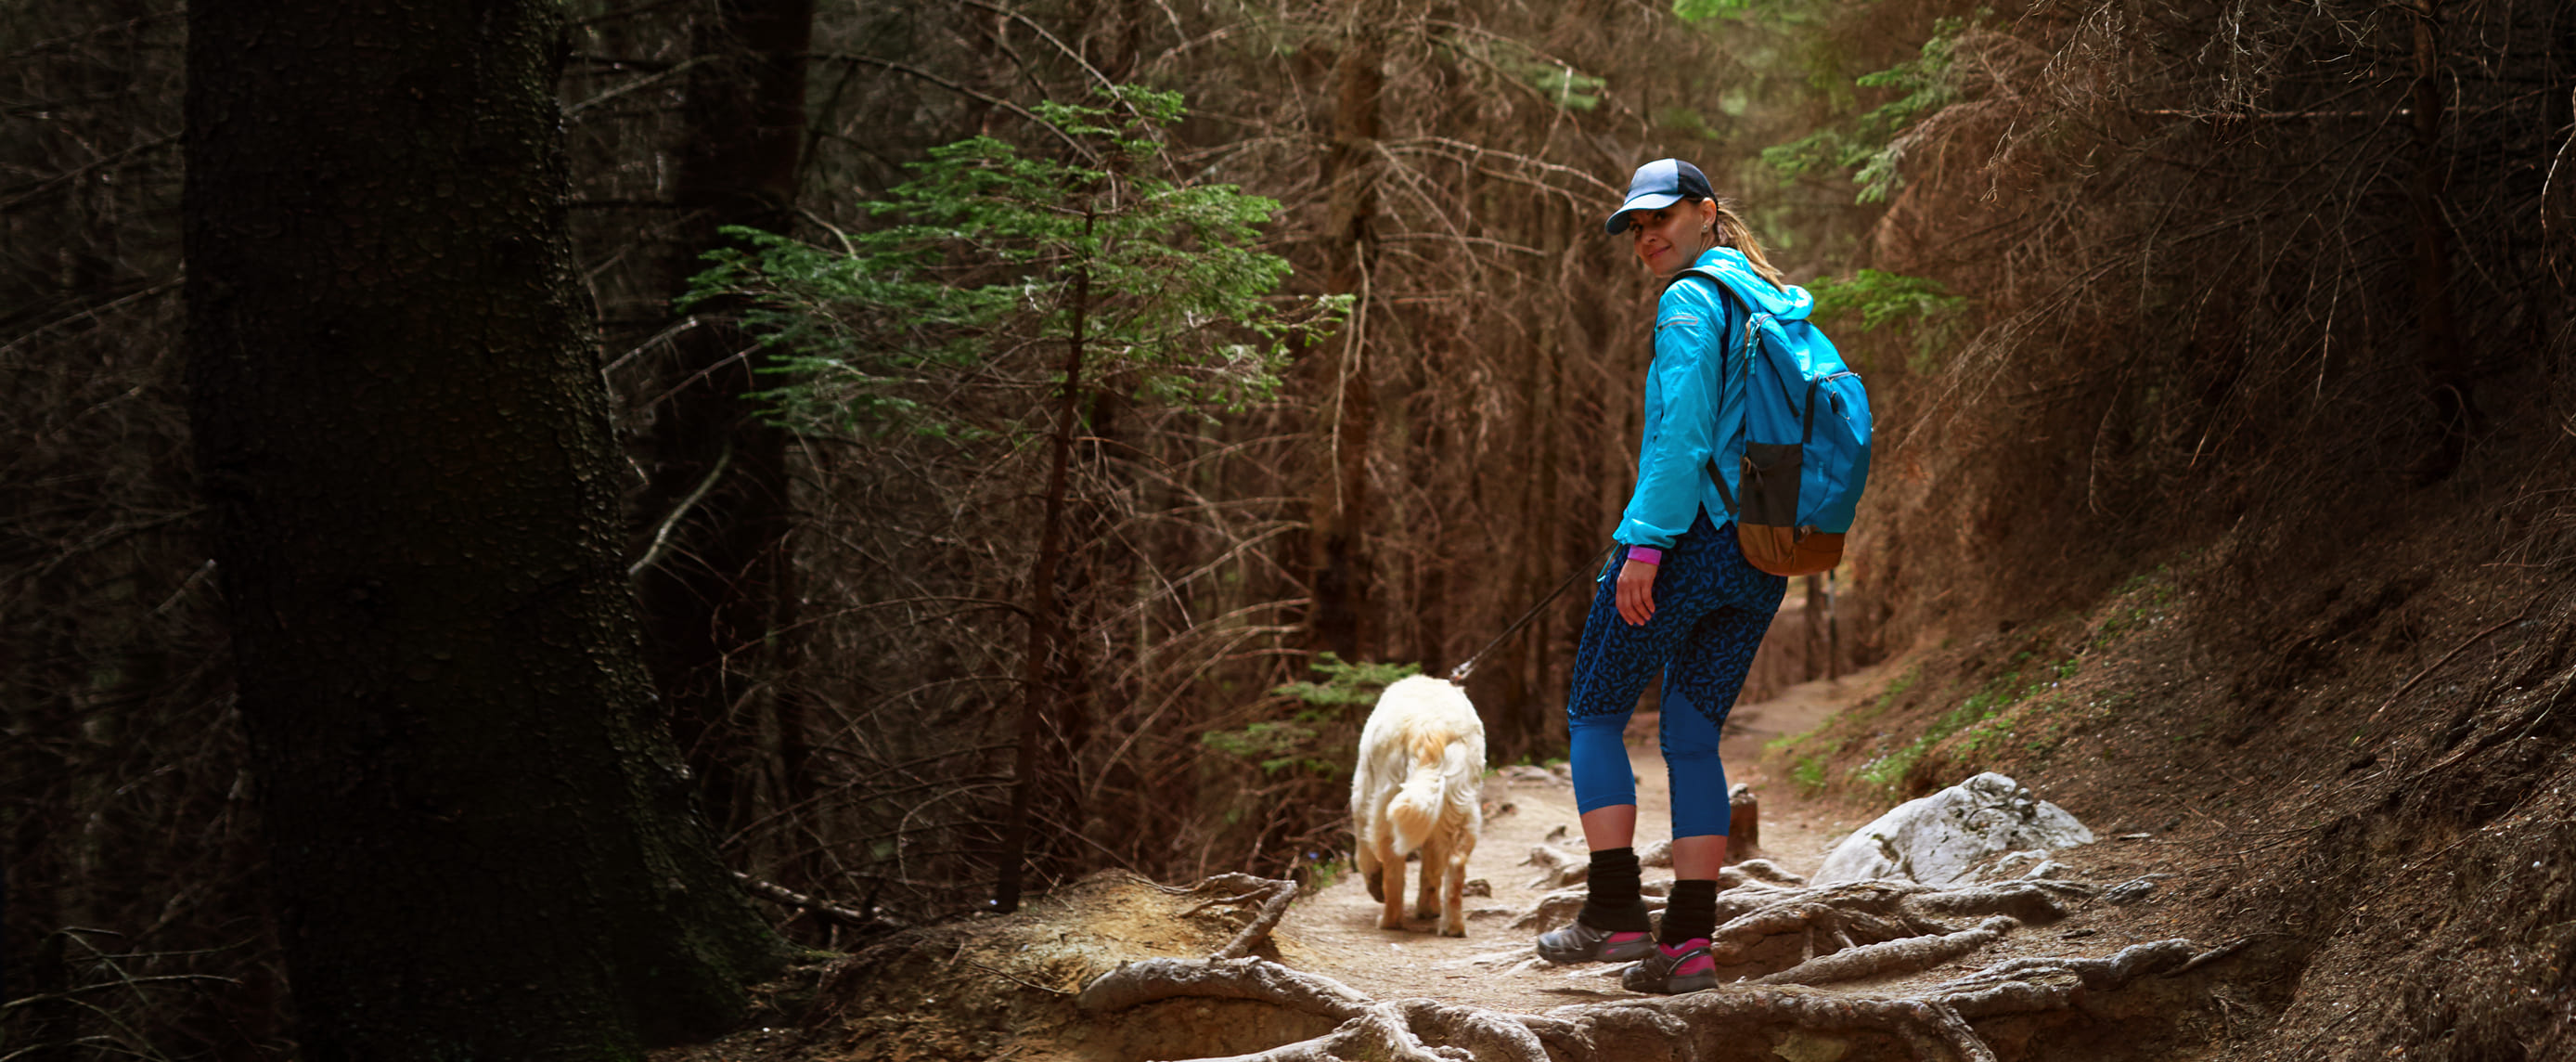 A lady hiking in the woods with her white dog